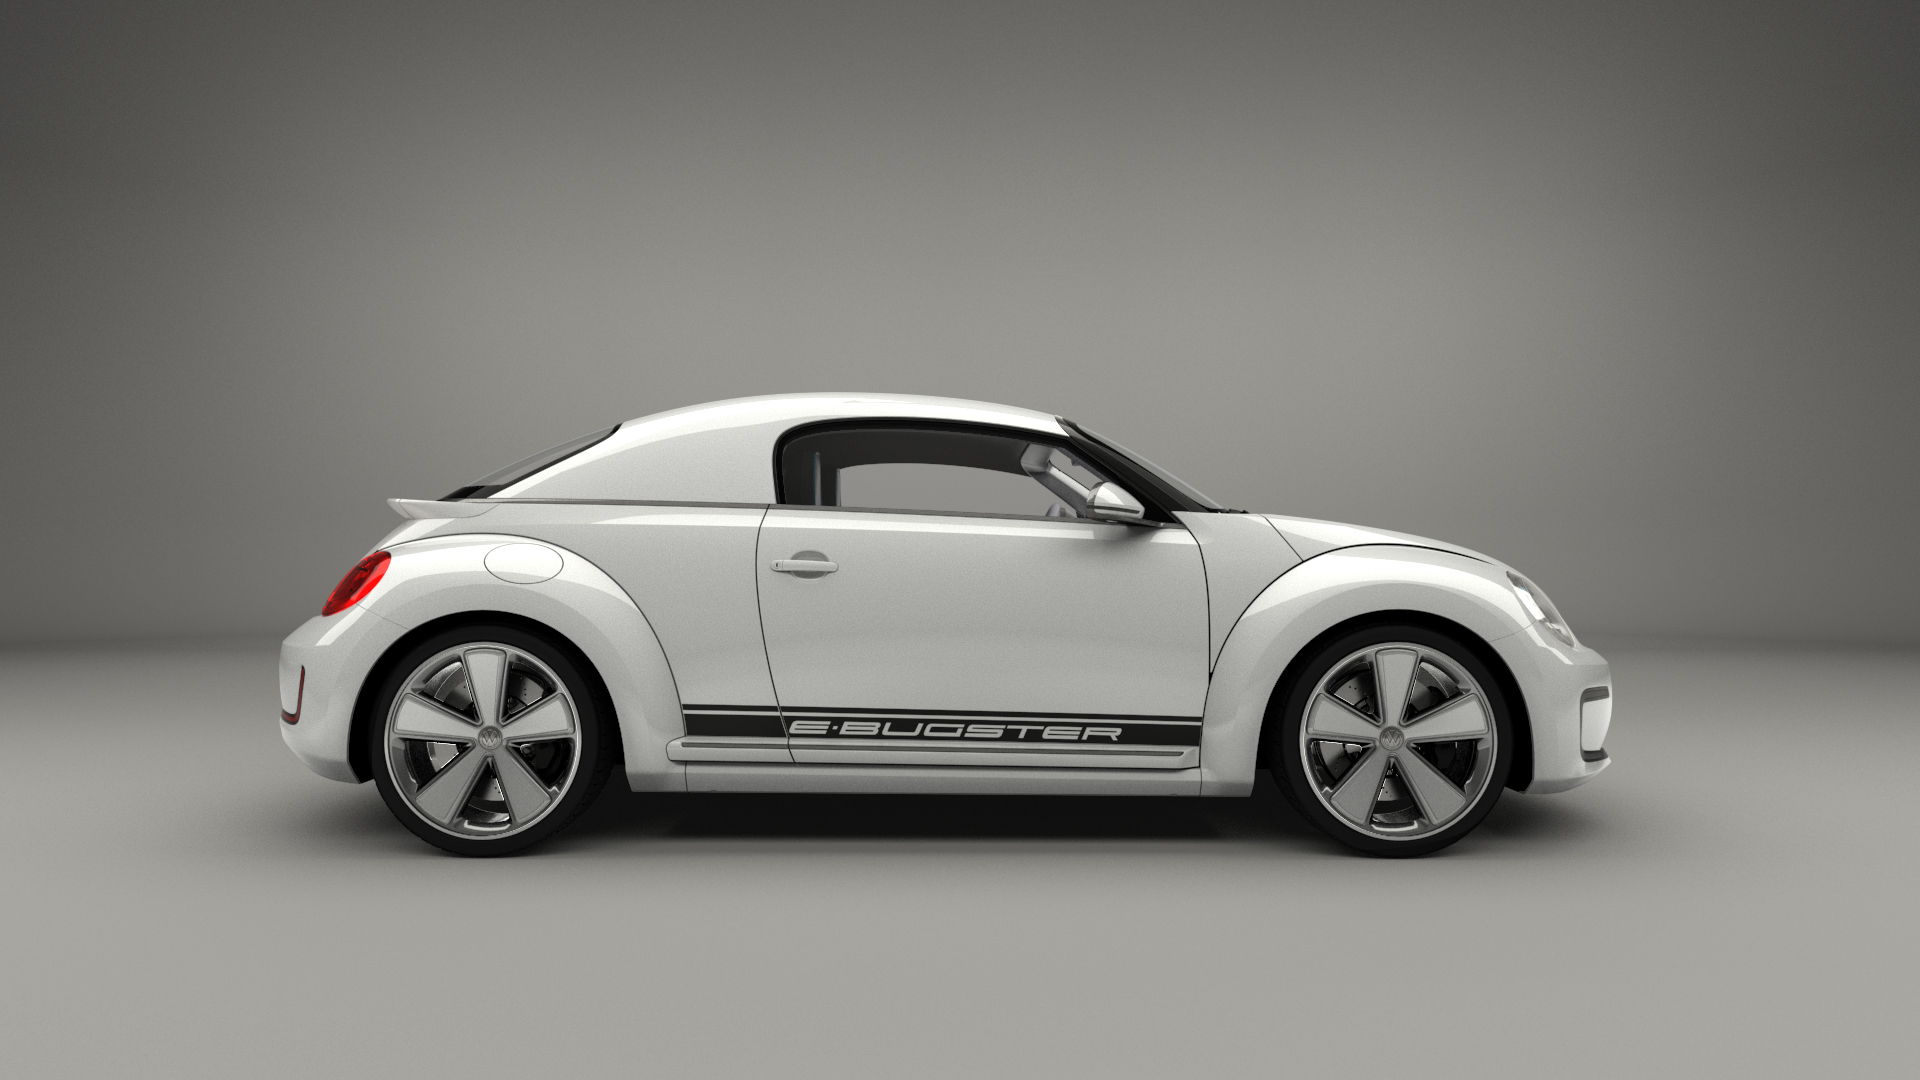 Volkswagen E bugster side view